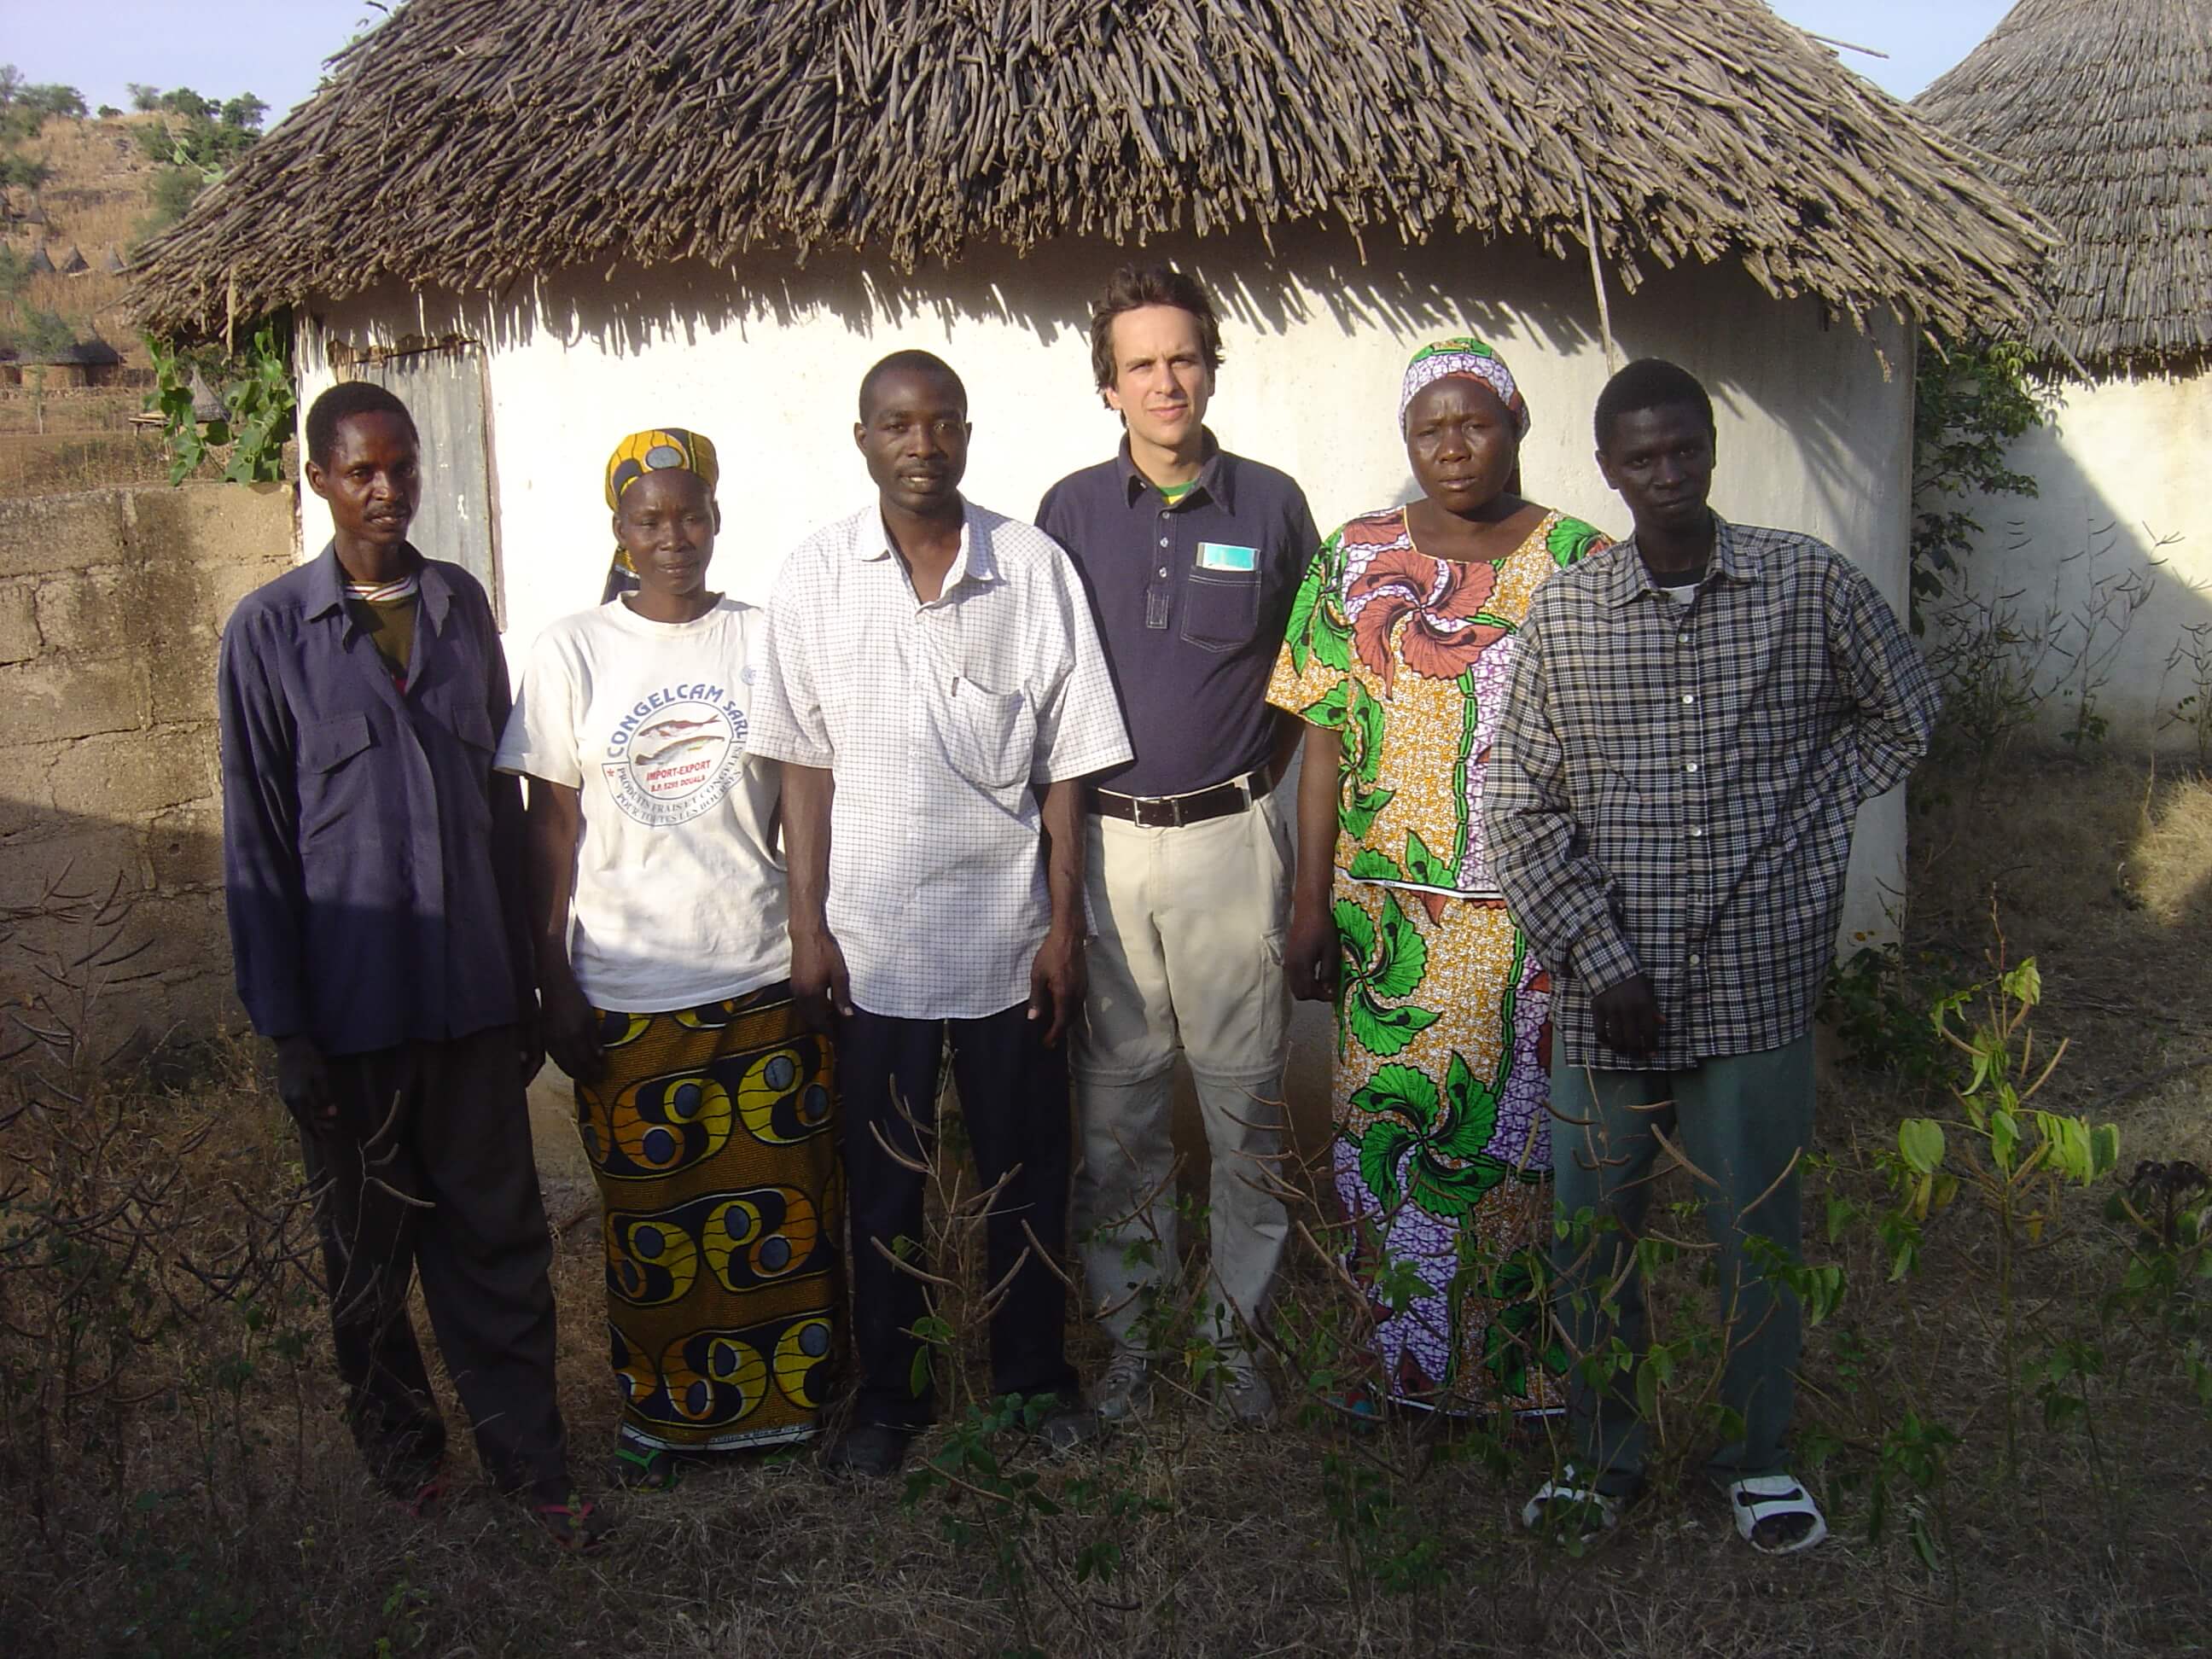 Researcher Tom Fritz with members of the Mafa tribe